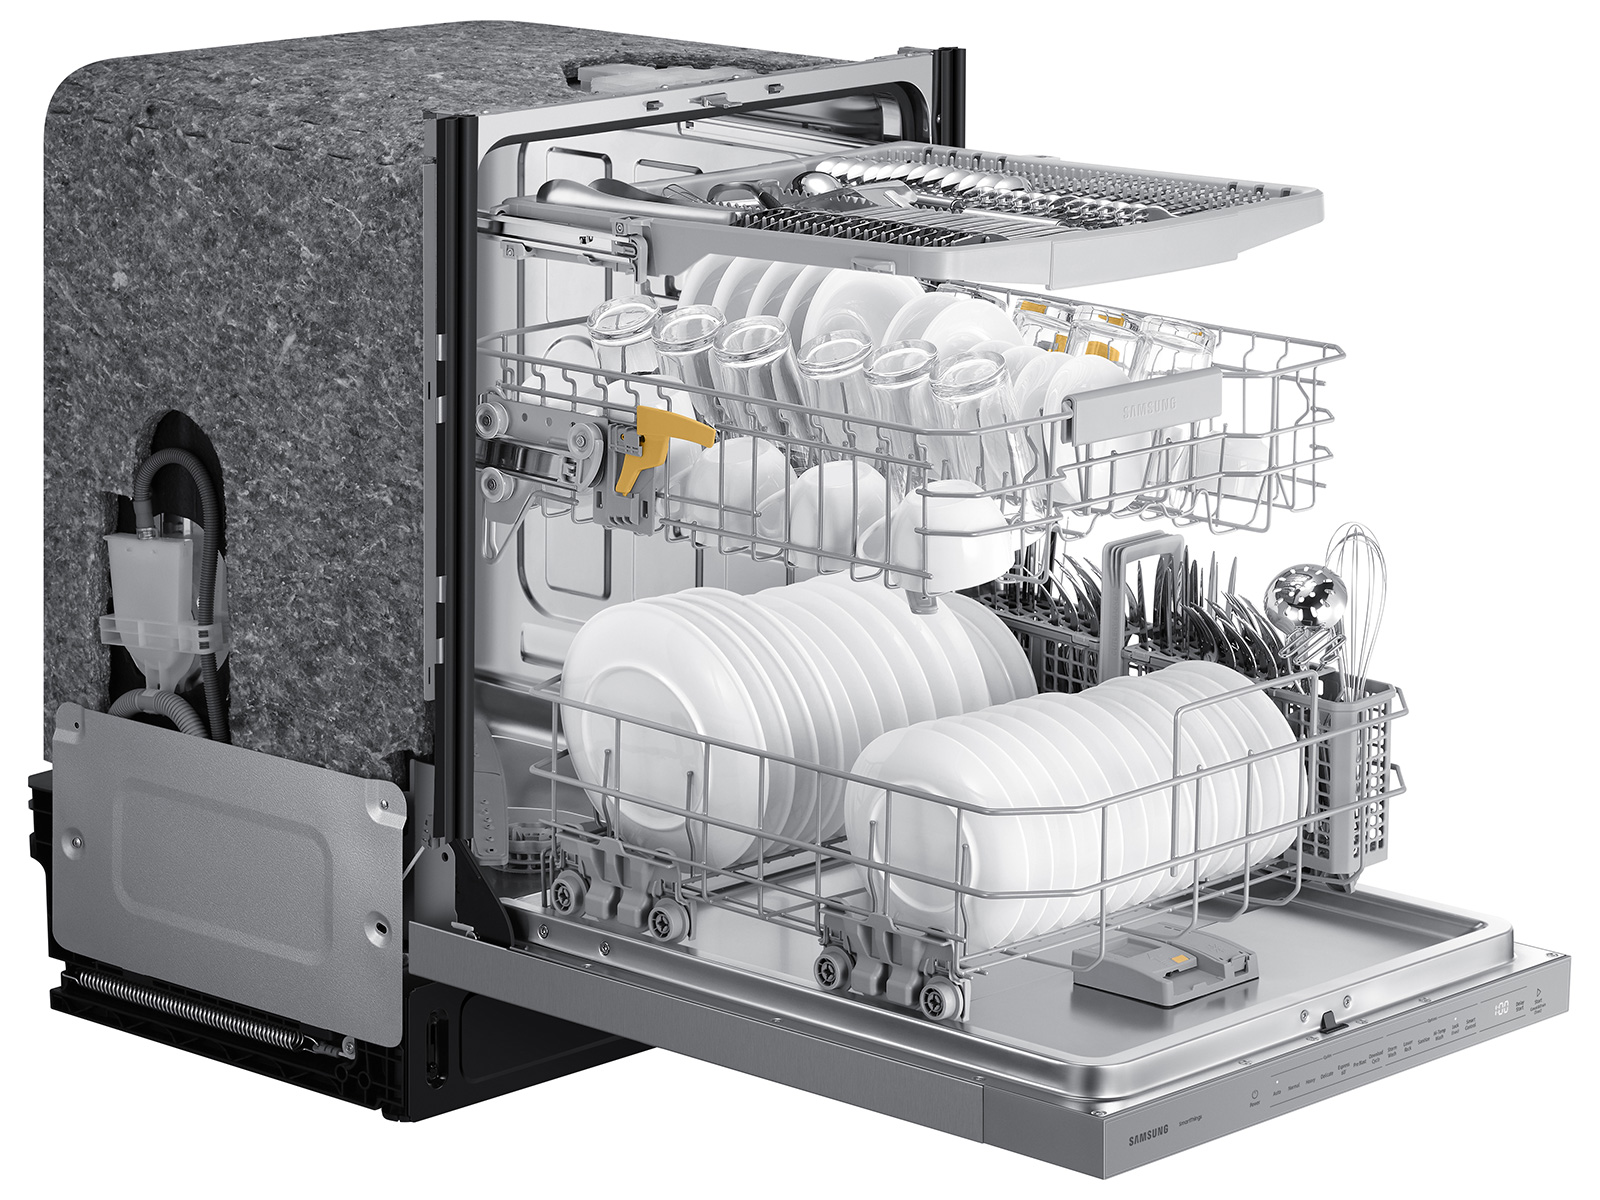 Thumbnail image of AutoRelease Smart 46dBA Dishwasher with StormWash™ in Stainless Steel